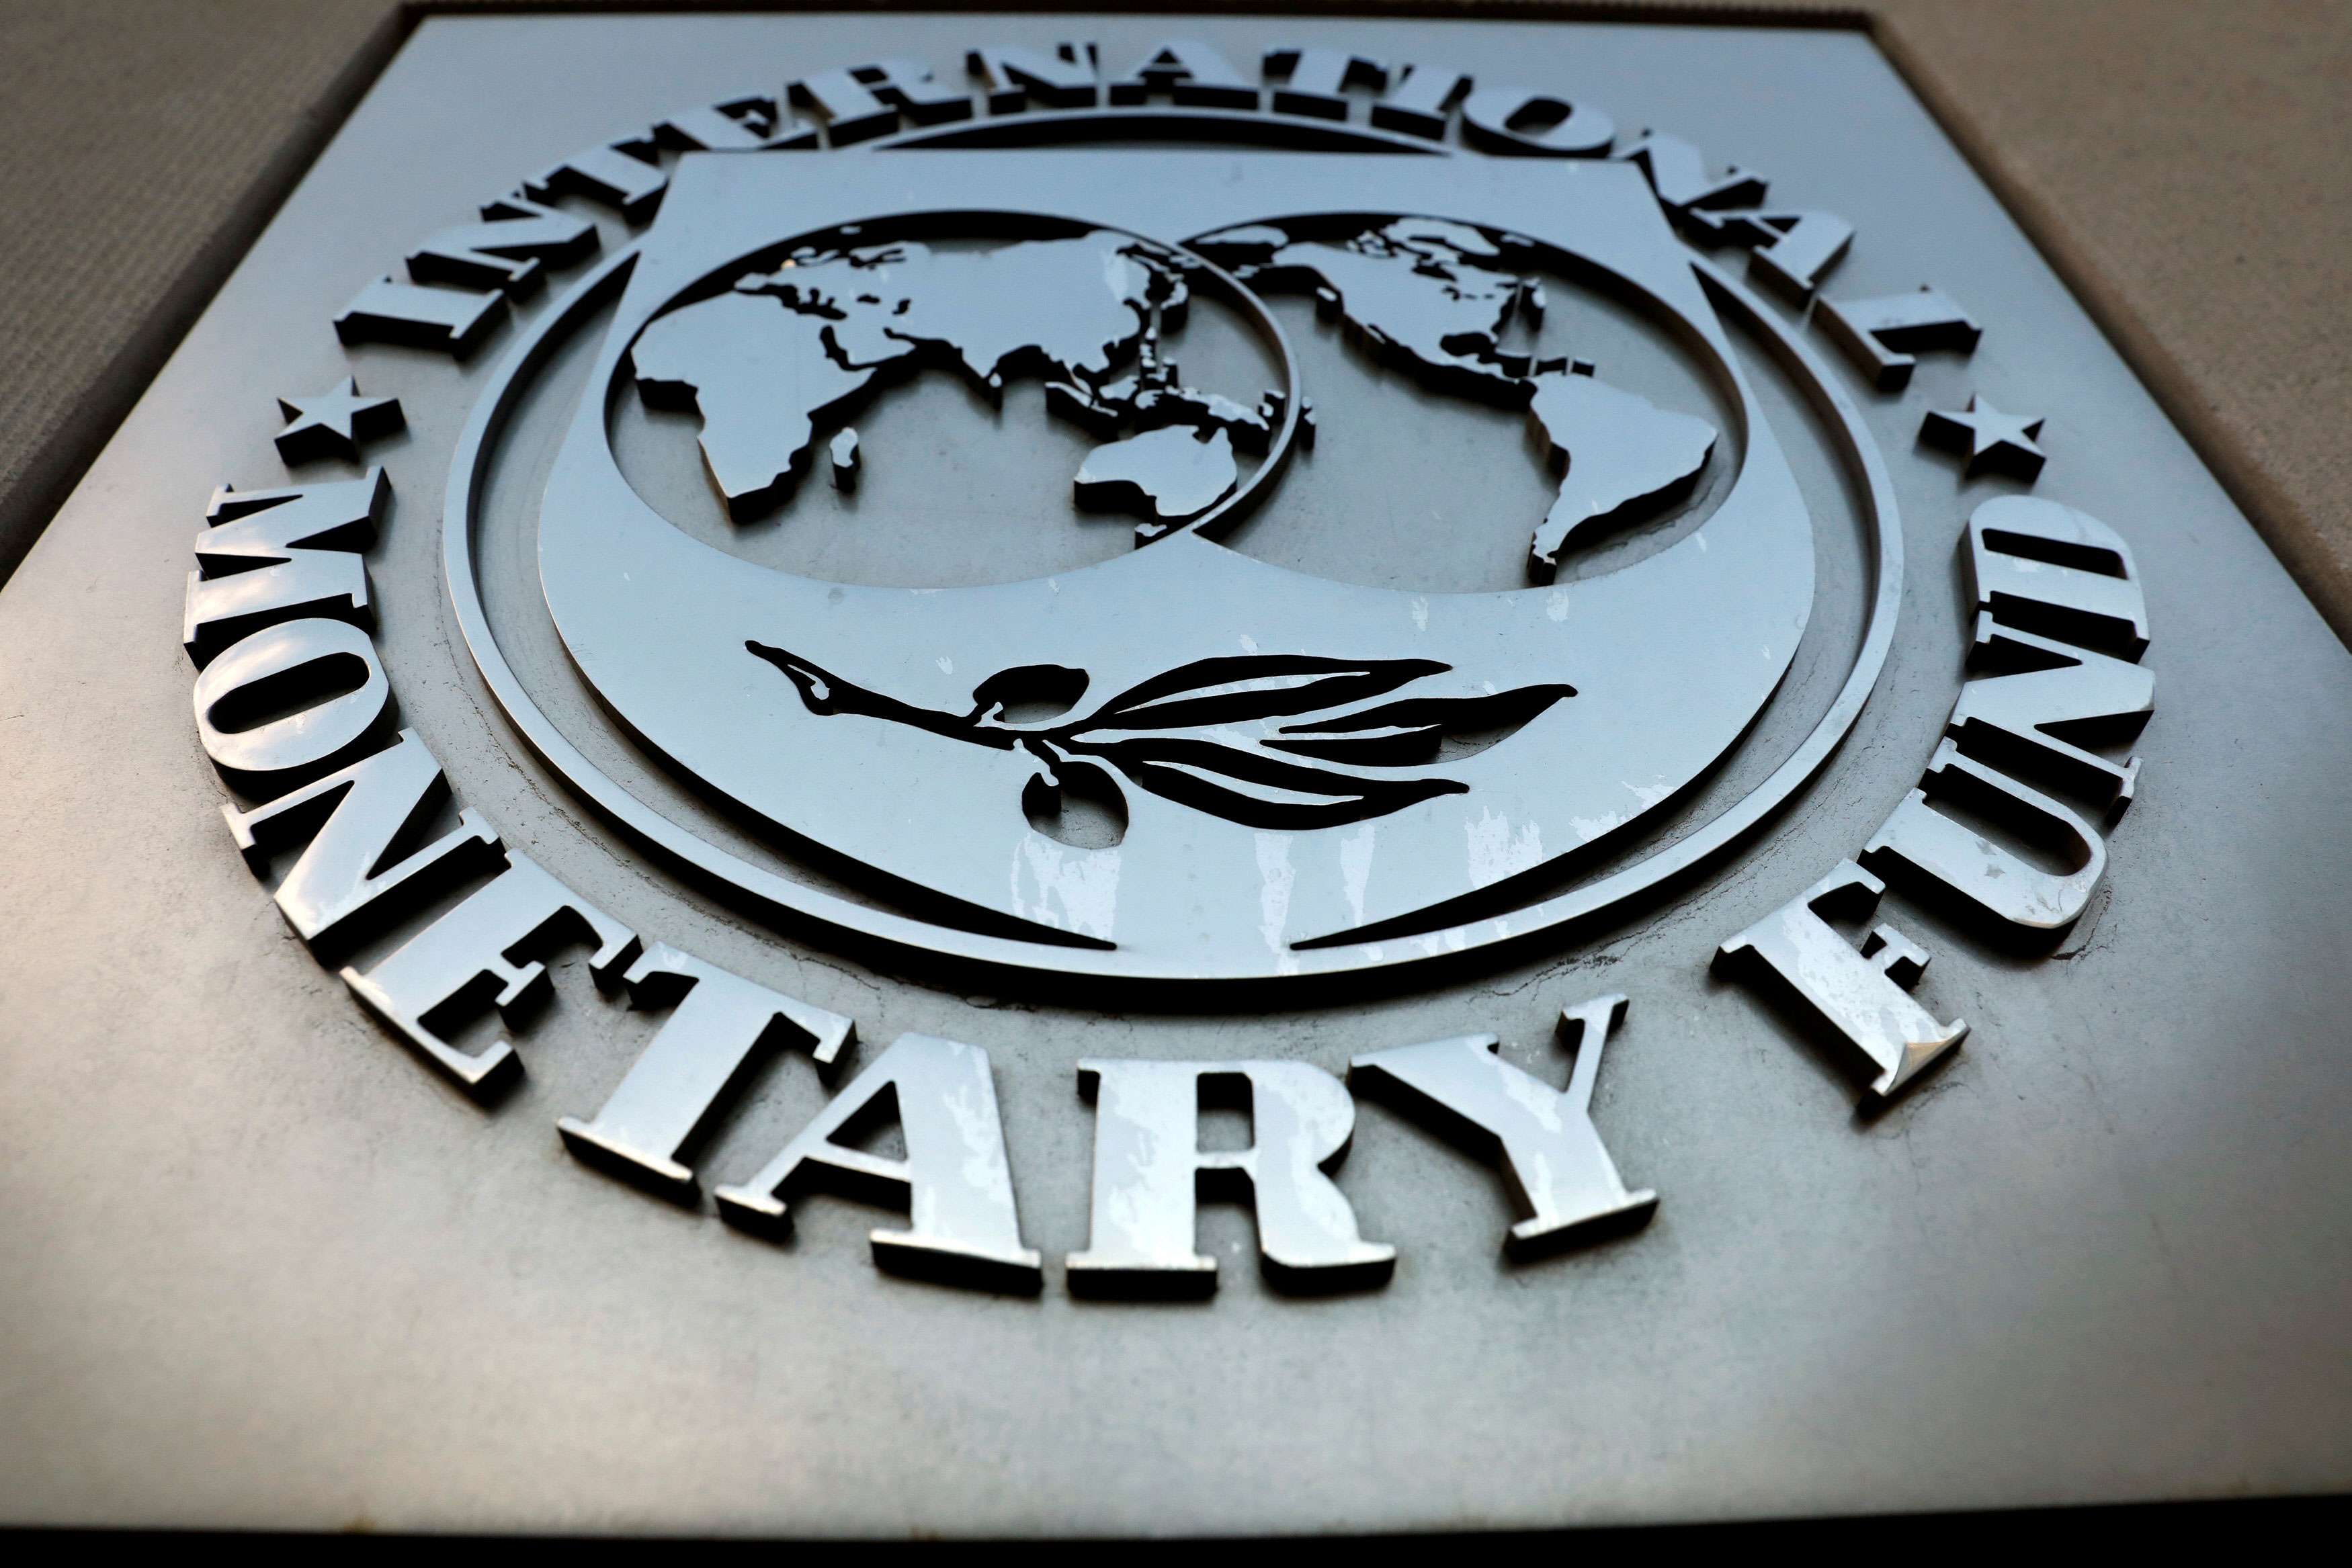 We’re from the International Monetary Fund, and we're here to help